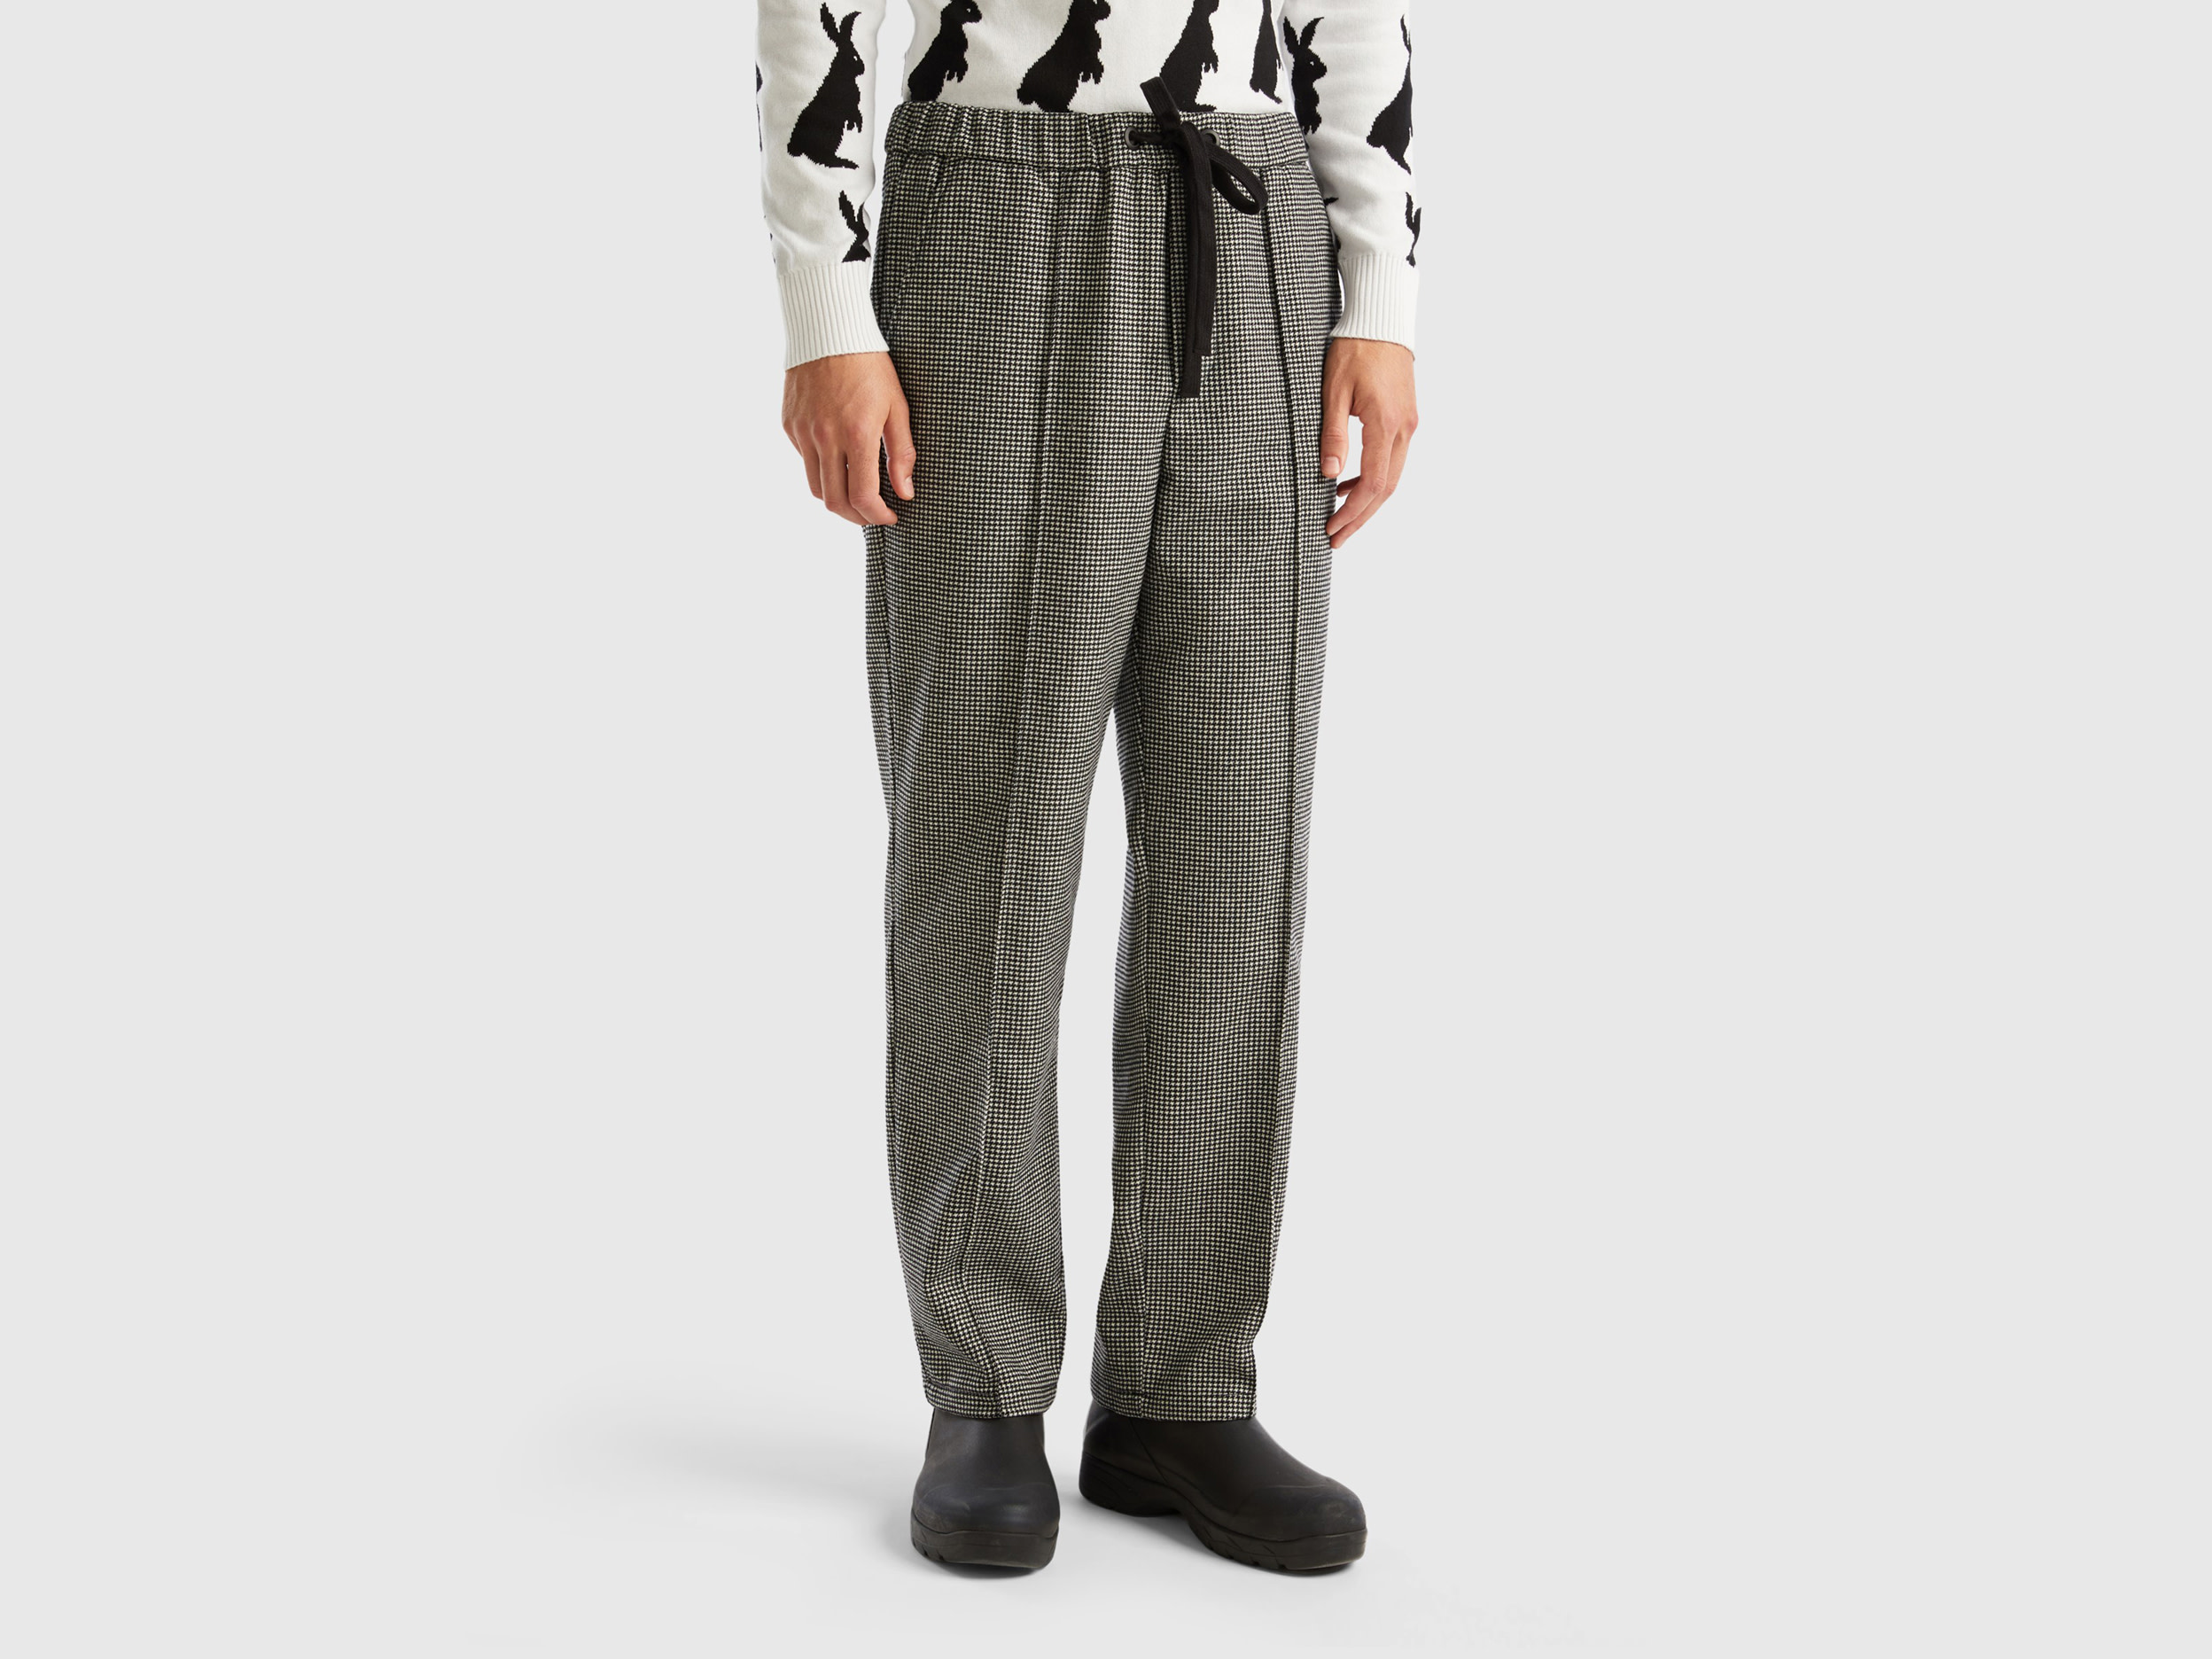 Benetton, Houndstooth Joggers, size M, Gray, Men